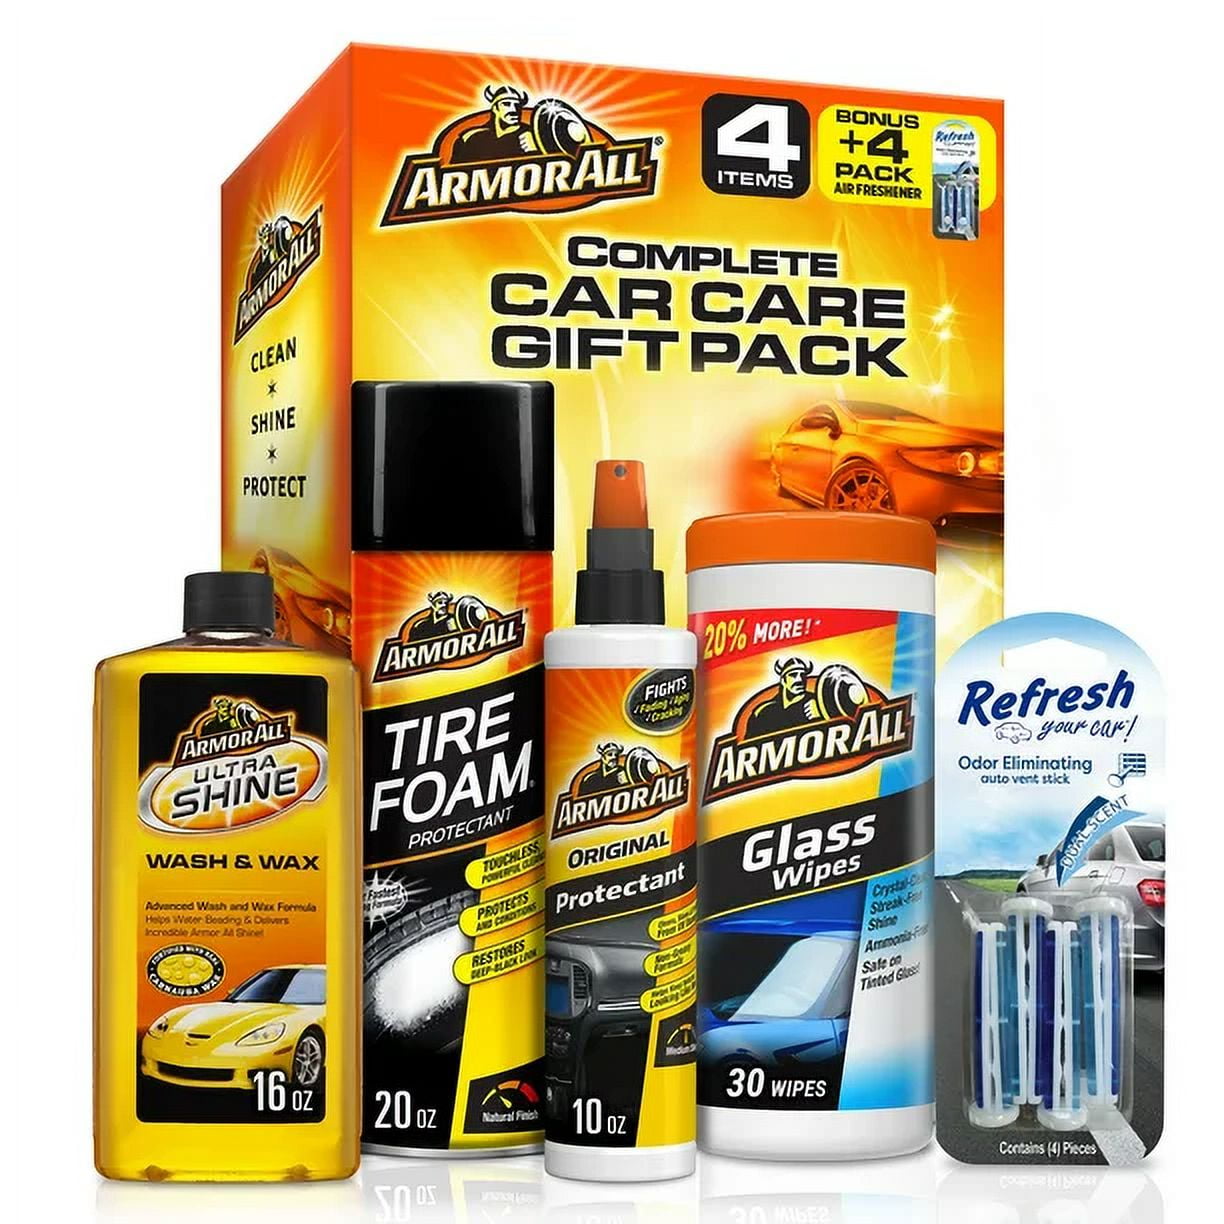 Armor All Complete Car Care Automotive Cleaning Kit 1 ct